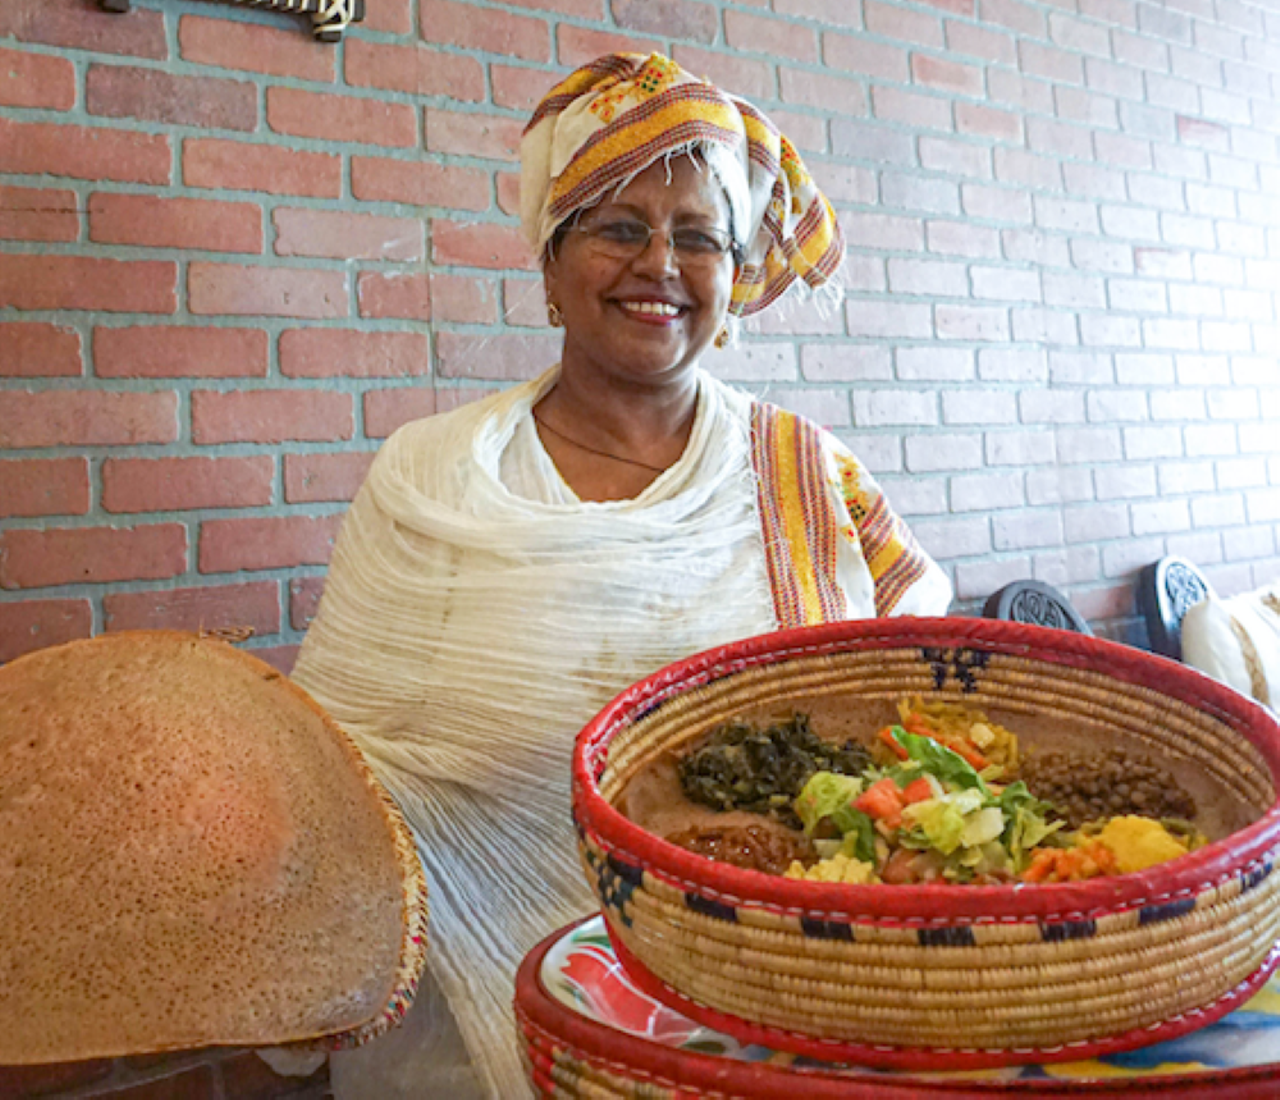 Queen of Sheba
11001 N 56th St., Temple Terrace
Queen of Sheba owner Seble Gizaw curated a menu focused solely on traditional Ethiopian cuisine with a weekday lunch buffet. The food is served on a traditional flatbread called teff and if you’re new to Ethiopian cuisine, start with the Queen’s Eight Platter, loaded with four beef and chicken samplings, alongside four veggie choices.
Photo via Queen Sheba